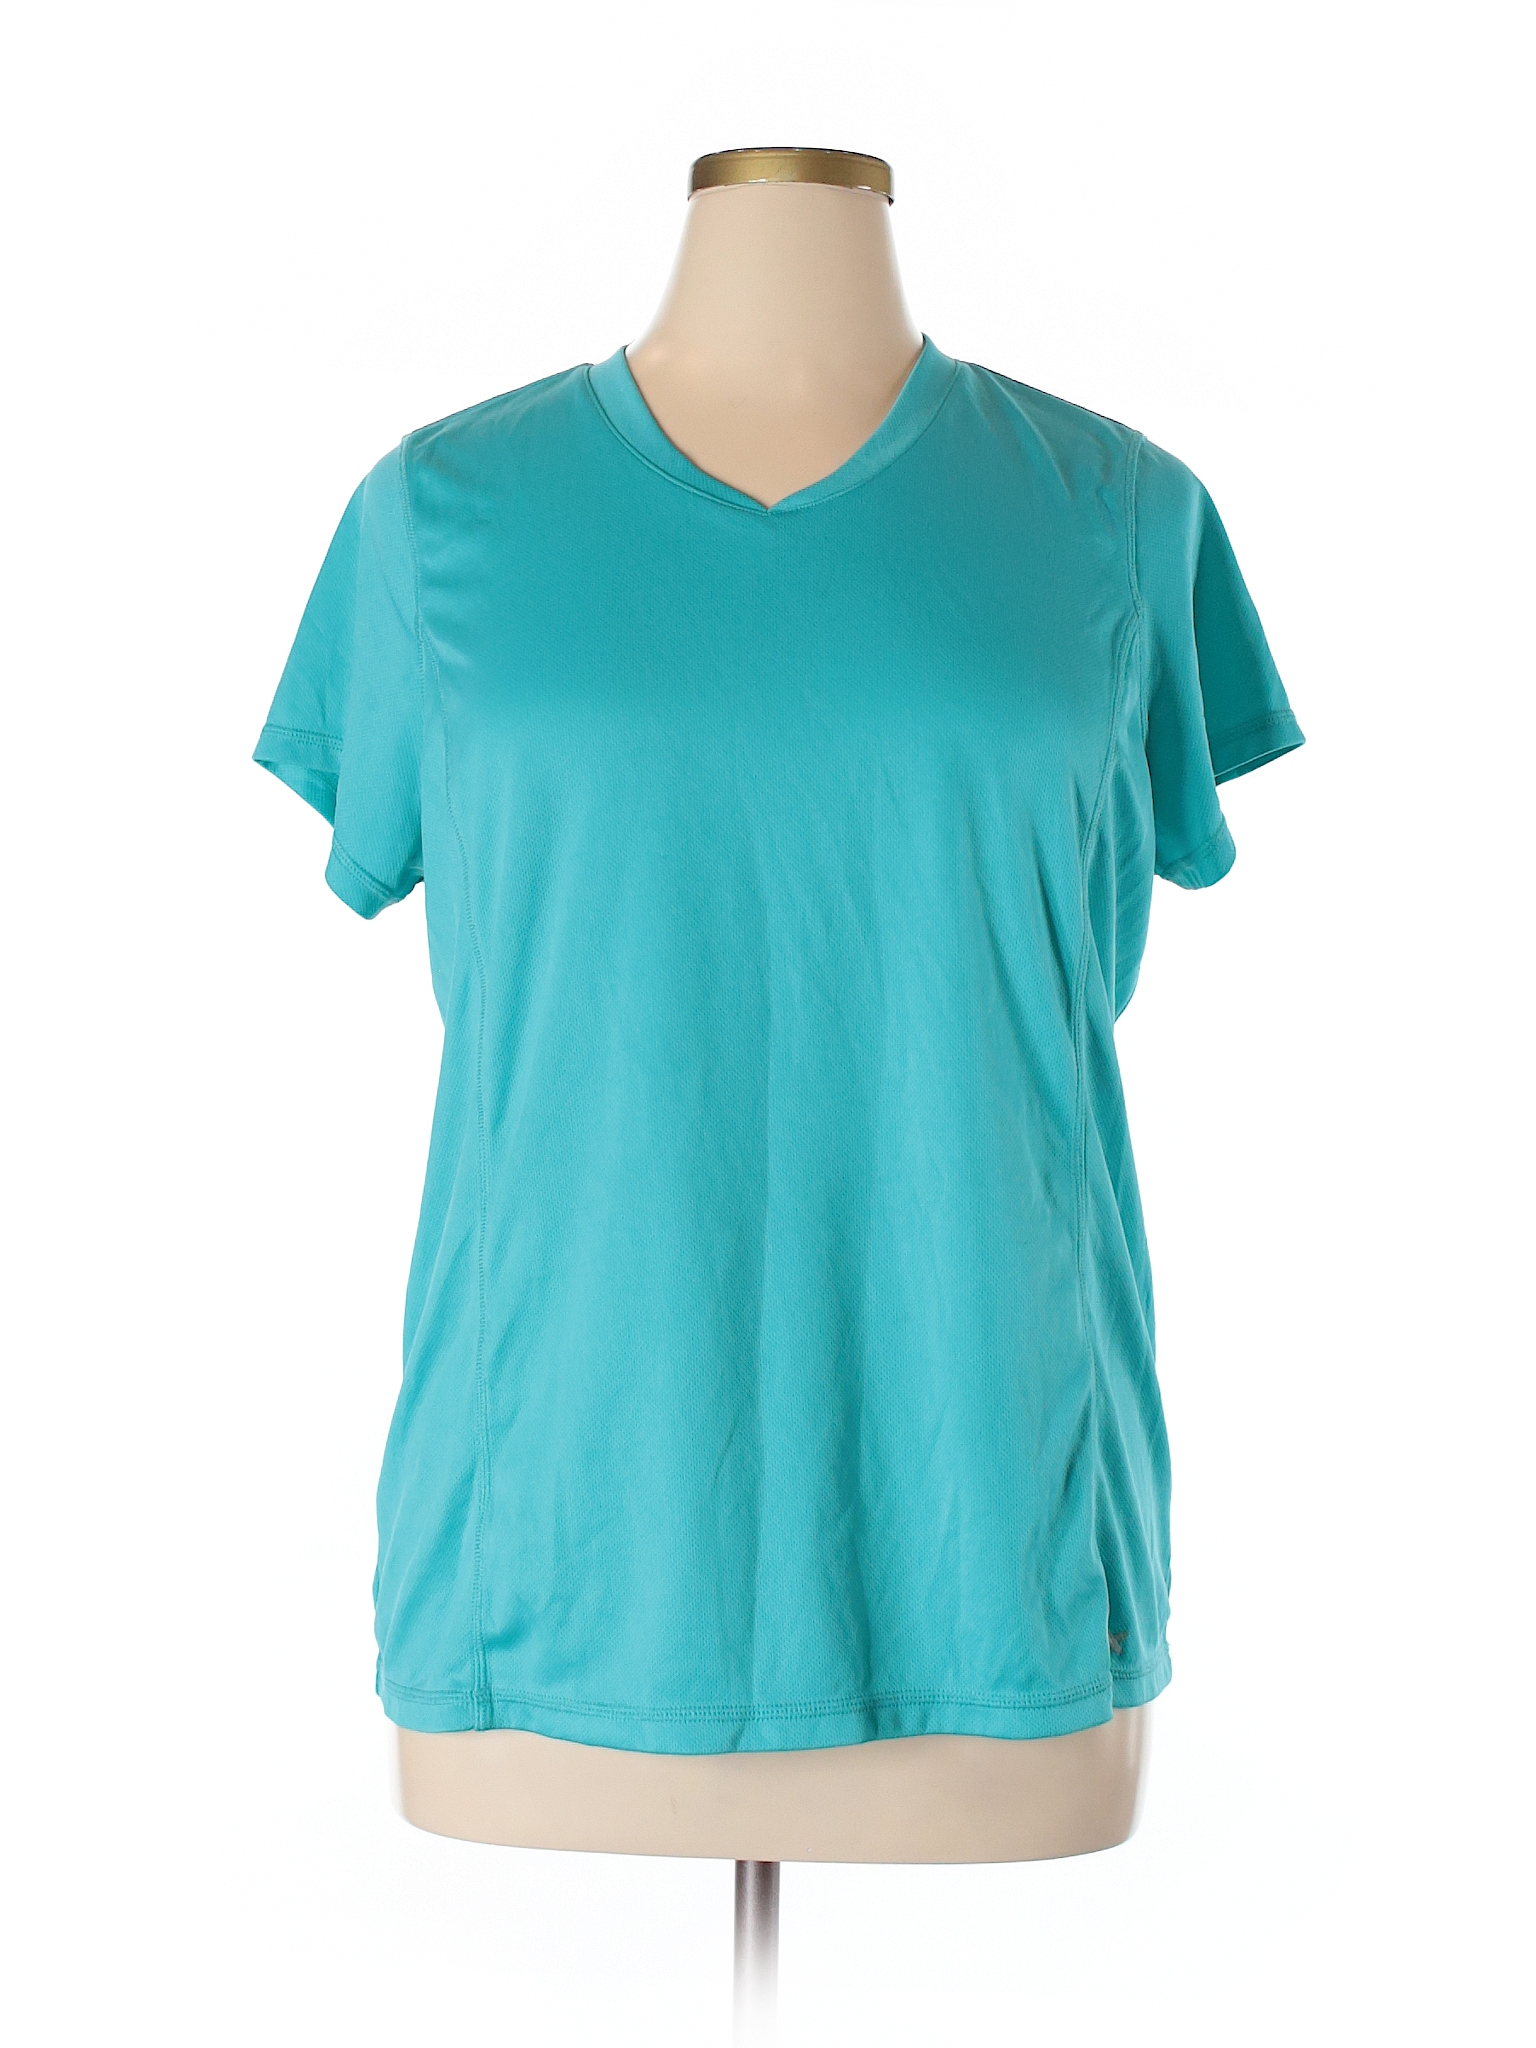 Xersion 100% Polyester Solid Blue Active T-Shirt Size 1X (Plus) - 88% ...